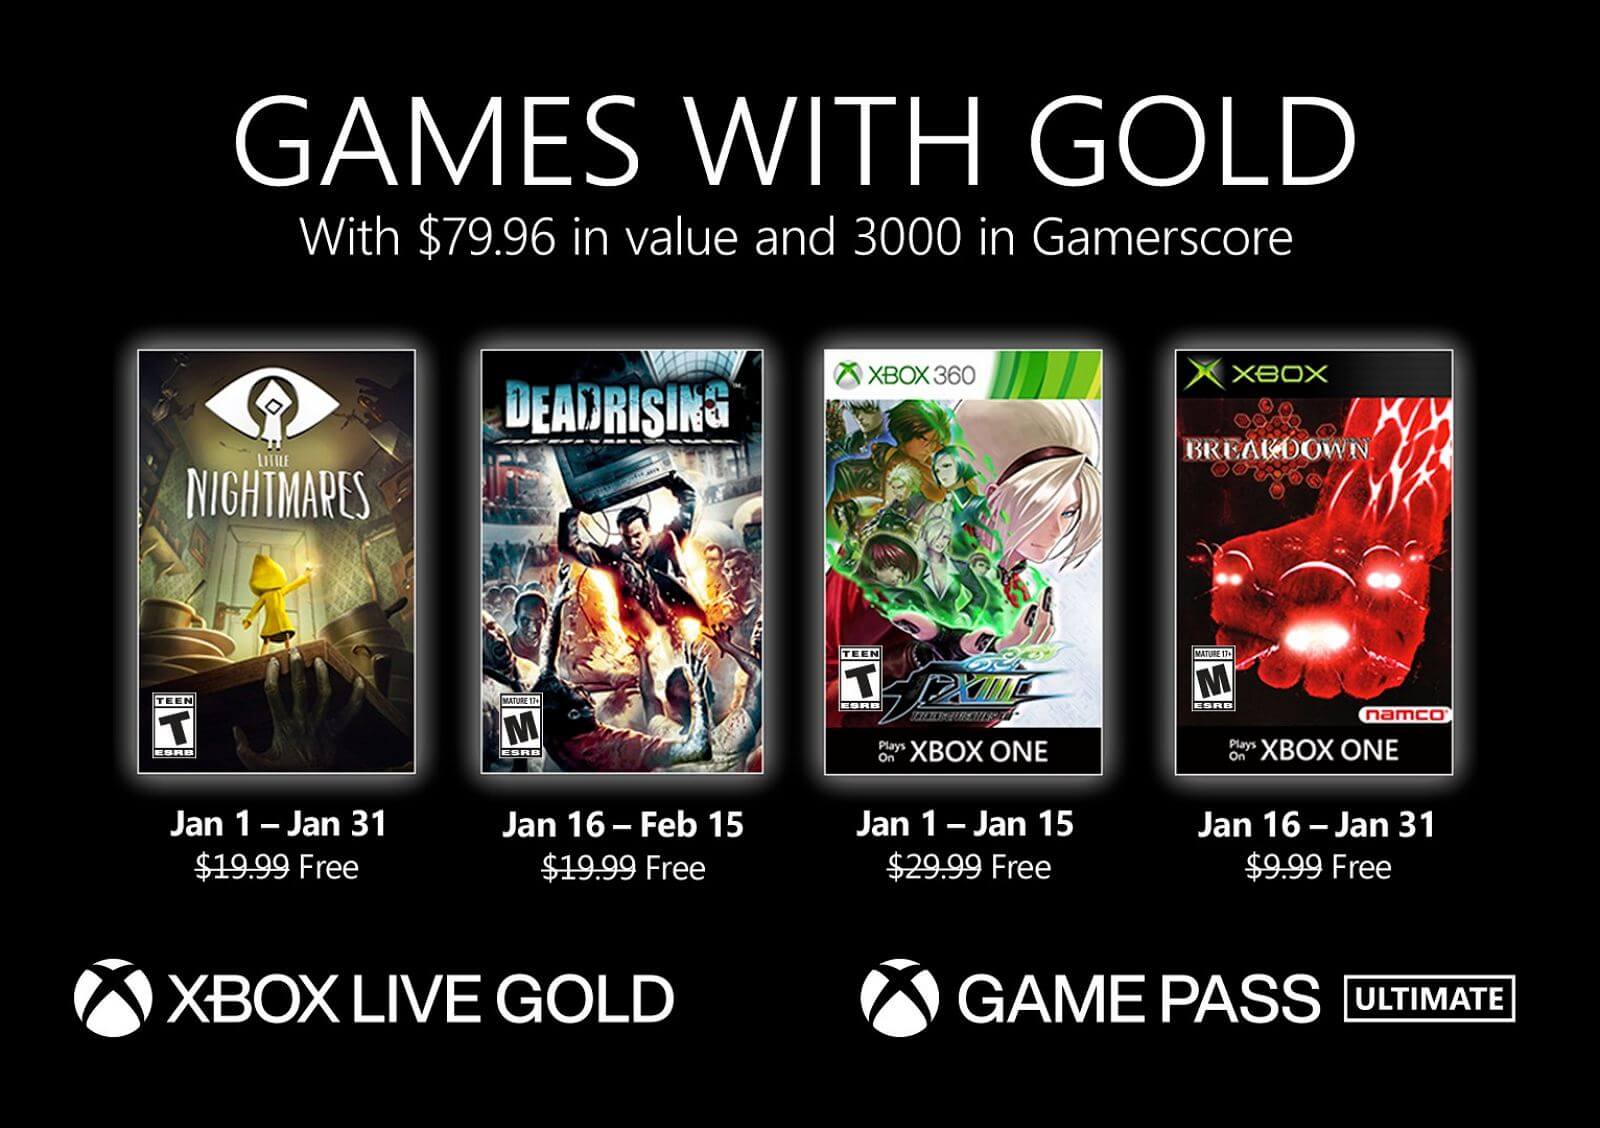 Xbox Live Gold Price Hike Announced, February Games With Gold